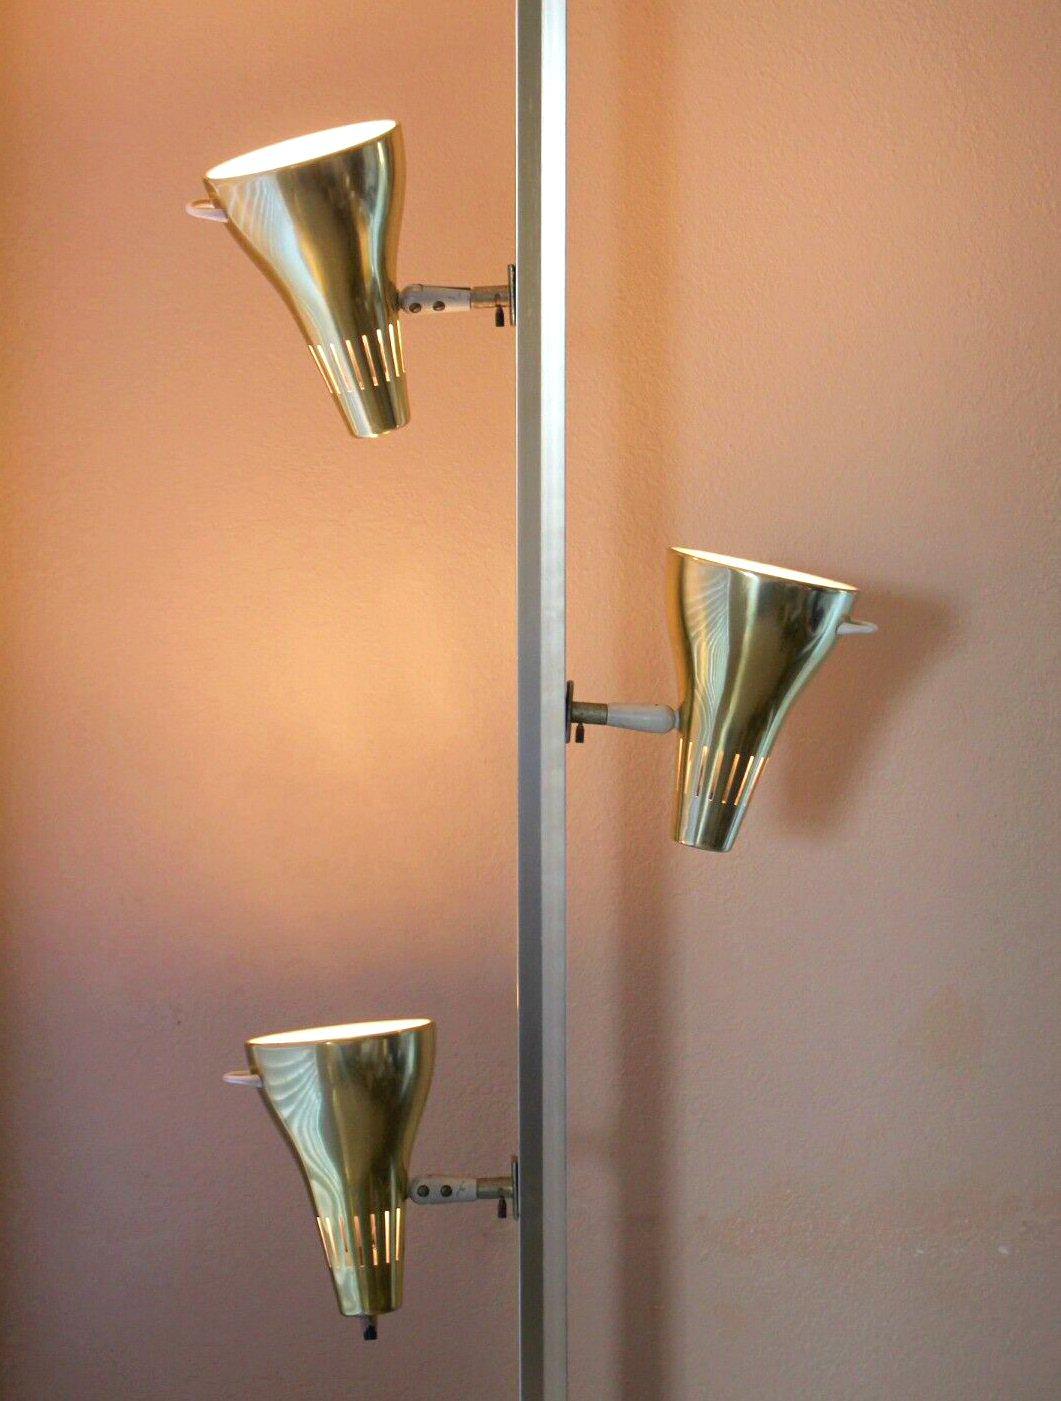 1950s tension pole lamp